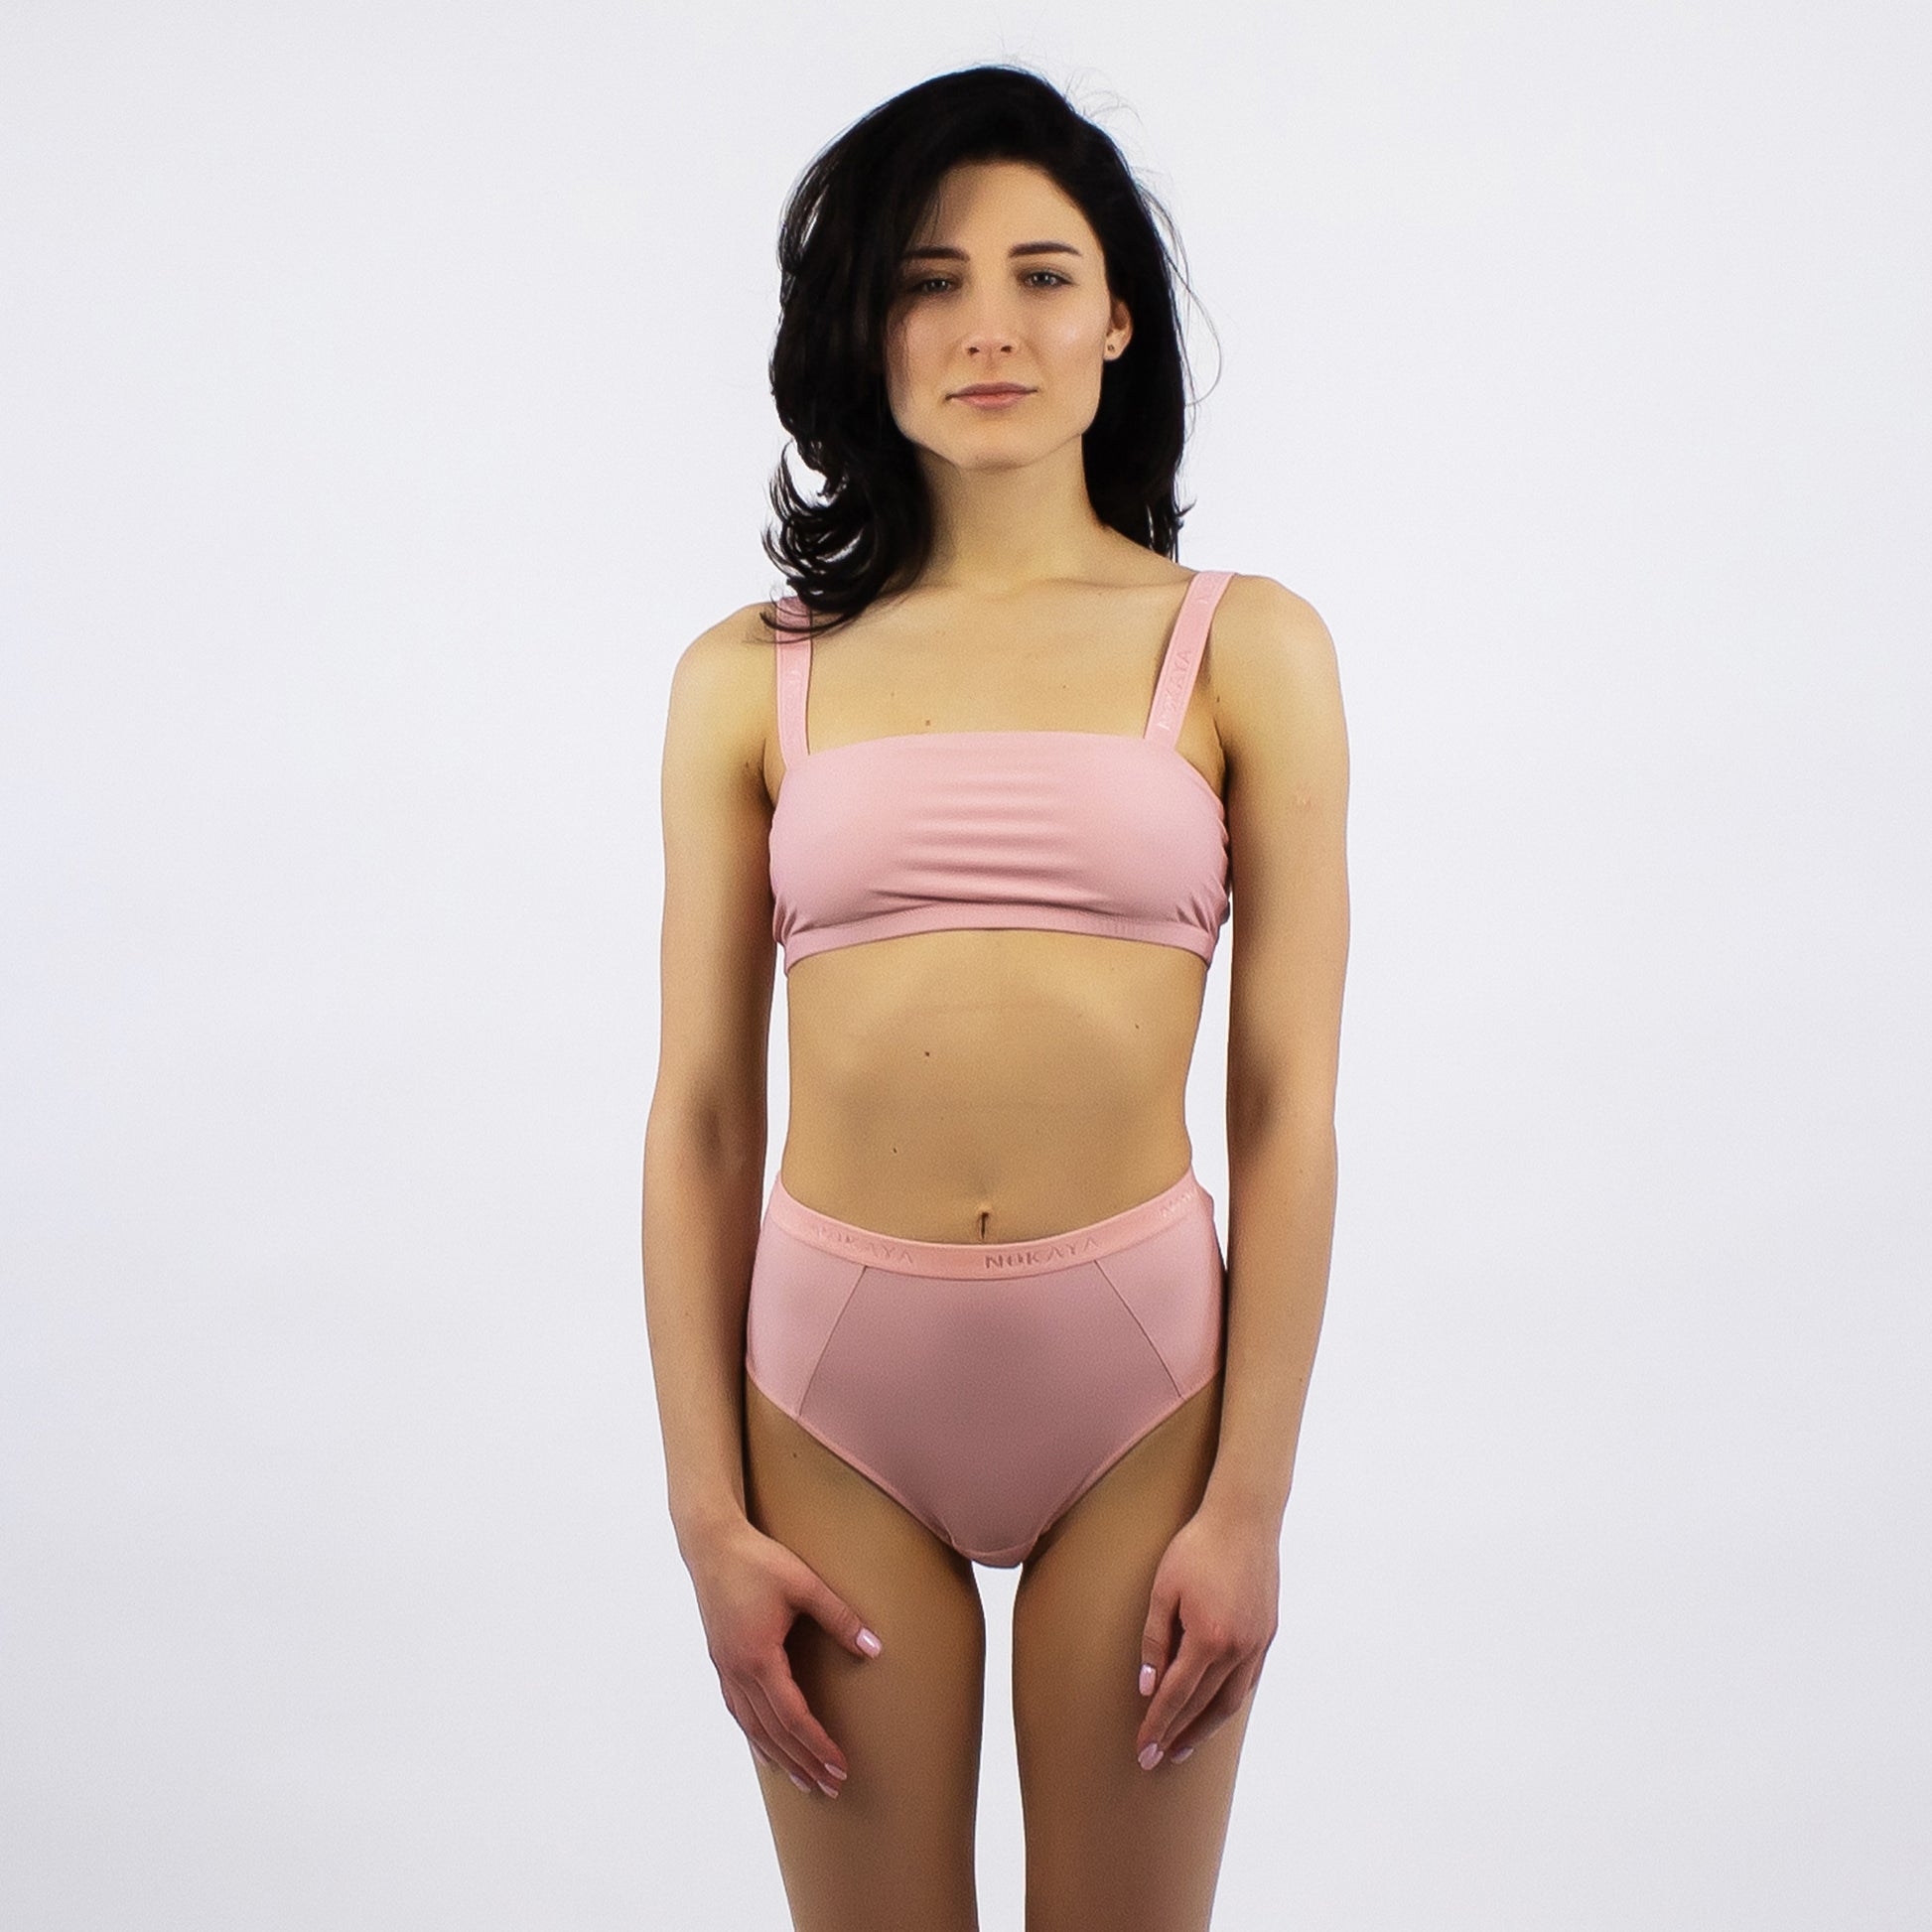 ULTRA high waist bikini is designed for a seamless finish, so they feel ultra-comfortable and won't be visible under clothing.